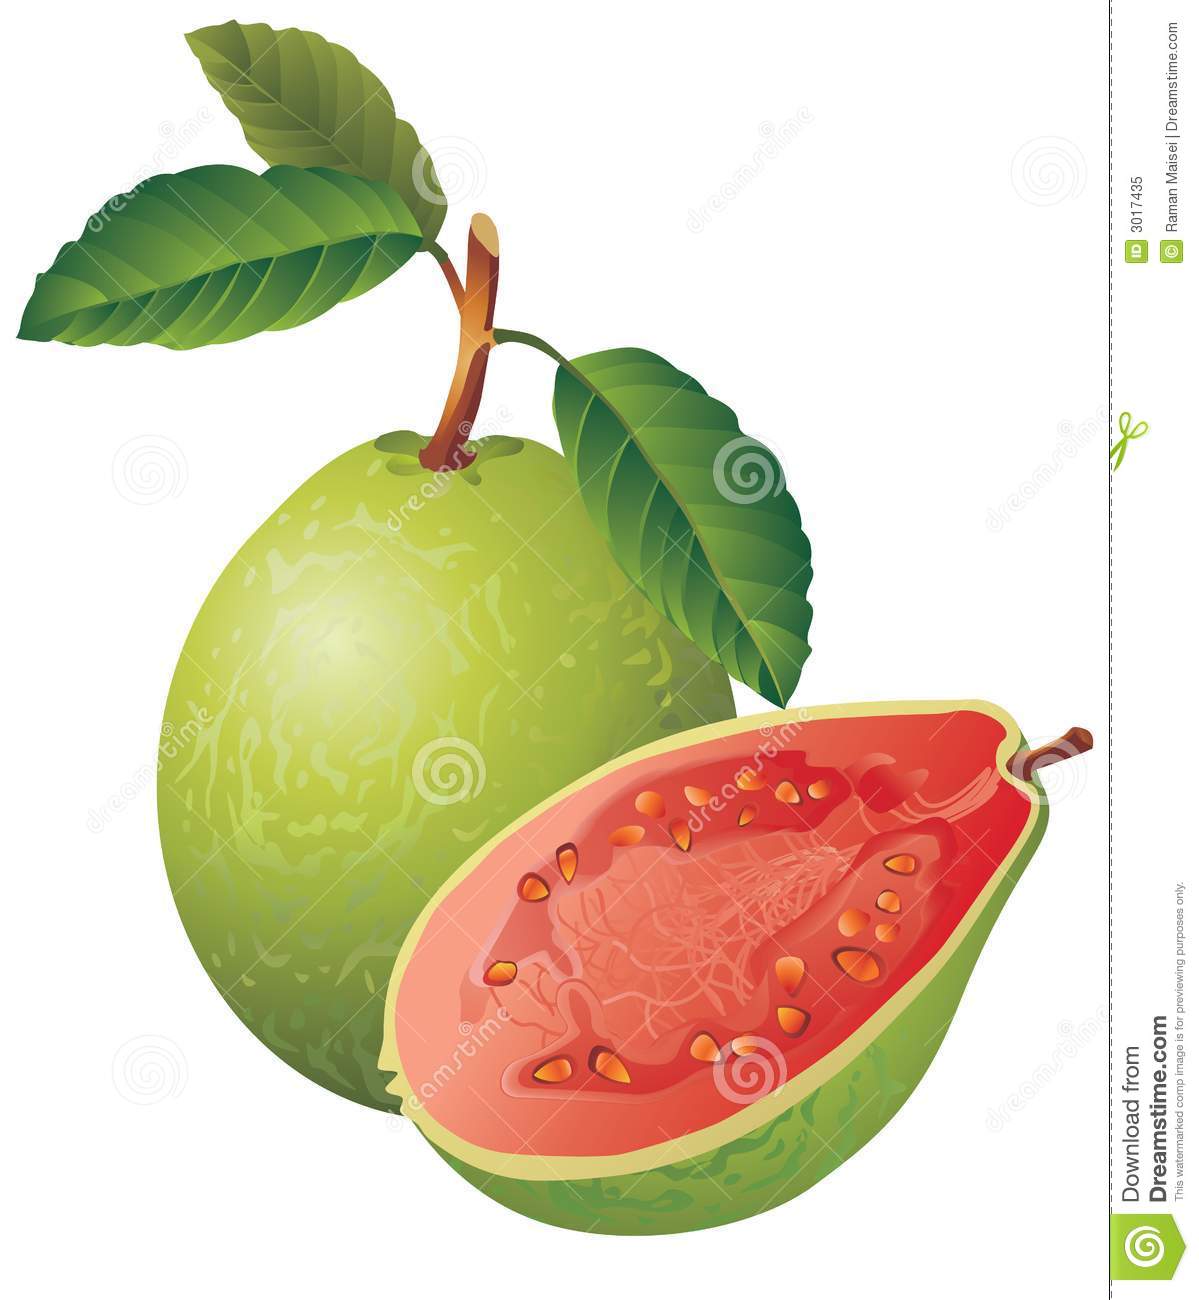 Raster Version Of Vector Image Of A Guavathere Is In Addition A Vector